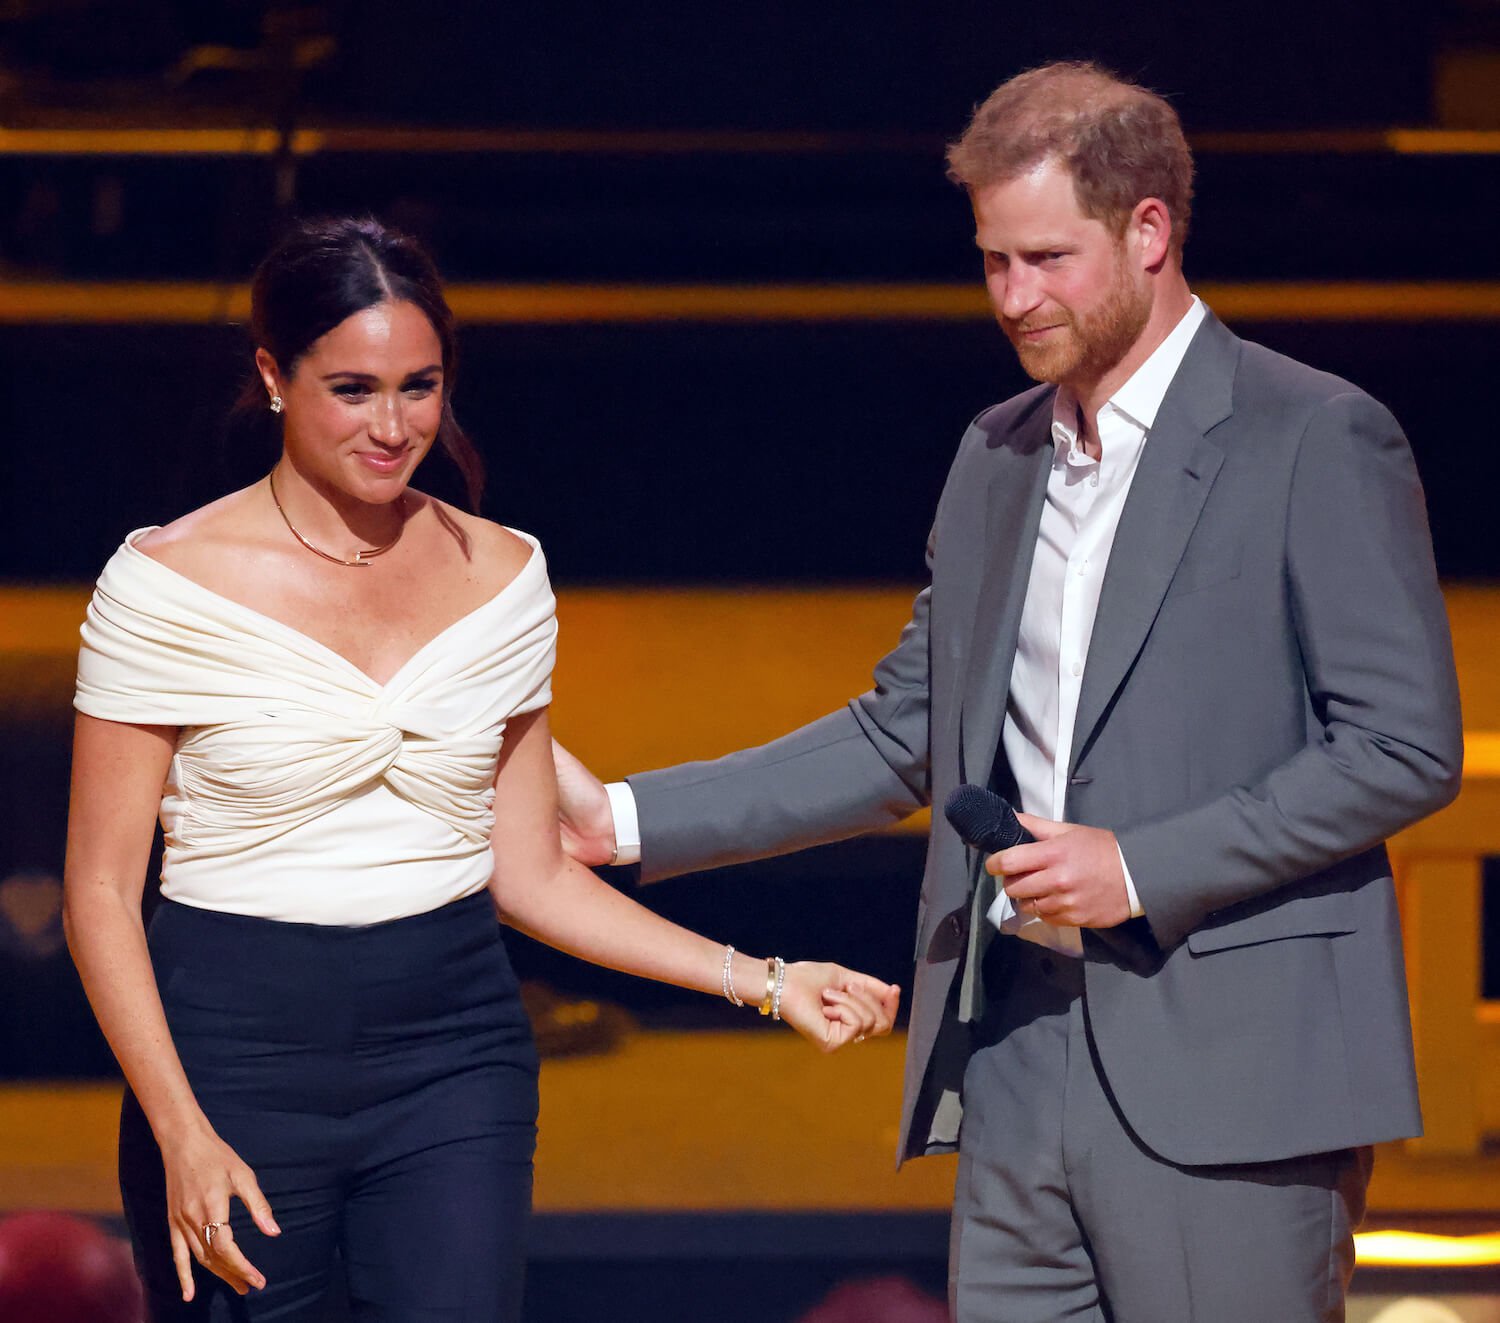 Prince Harry places a hand on Meghan Markle's arm at an event